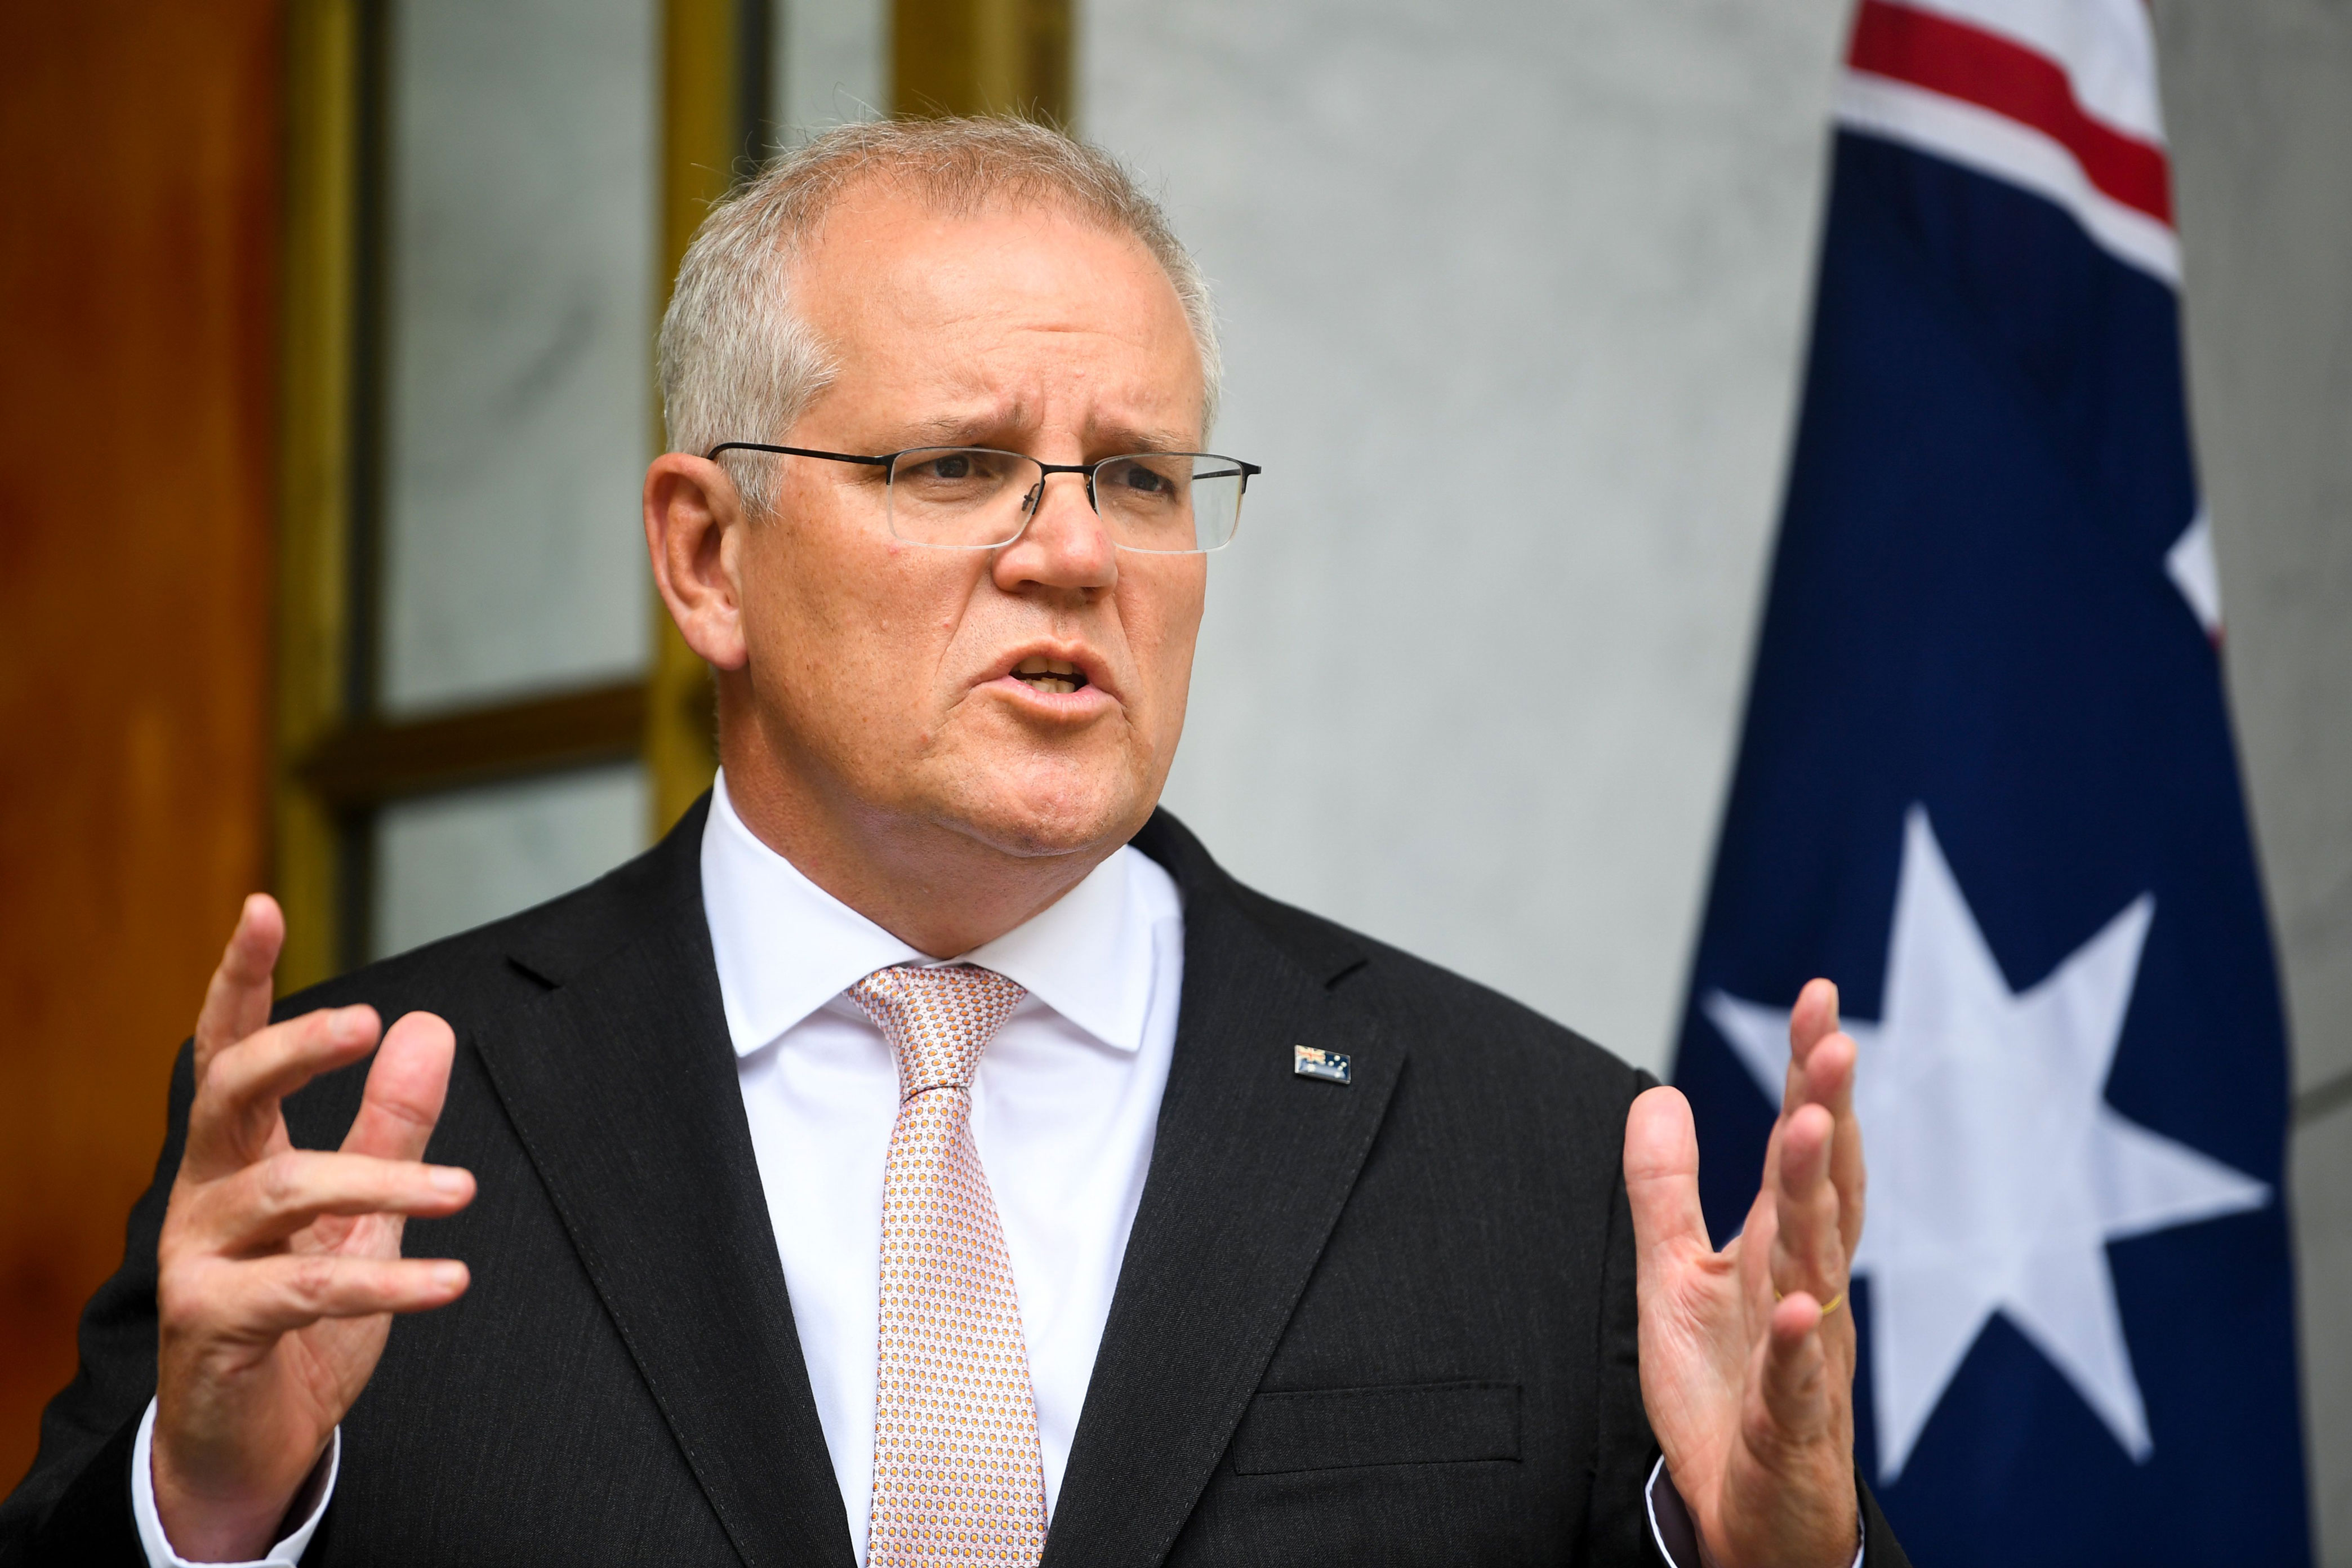 Australian Prime Minister Scott Morrison speaks to the media during a press conference following a national cabinet meeting, at Parliament House in Canberra, Australia, Thursday.